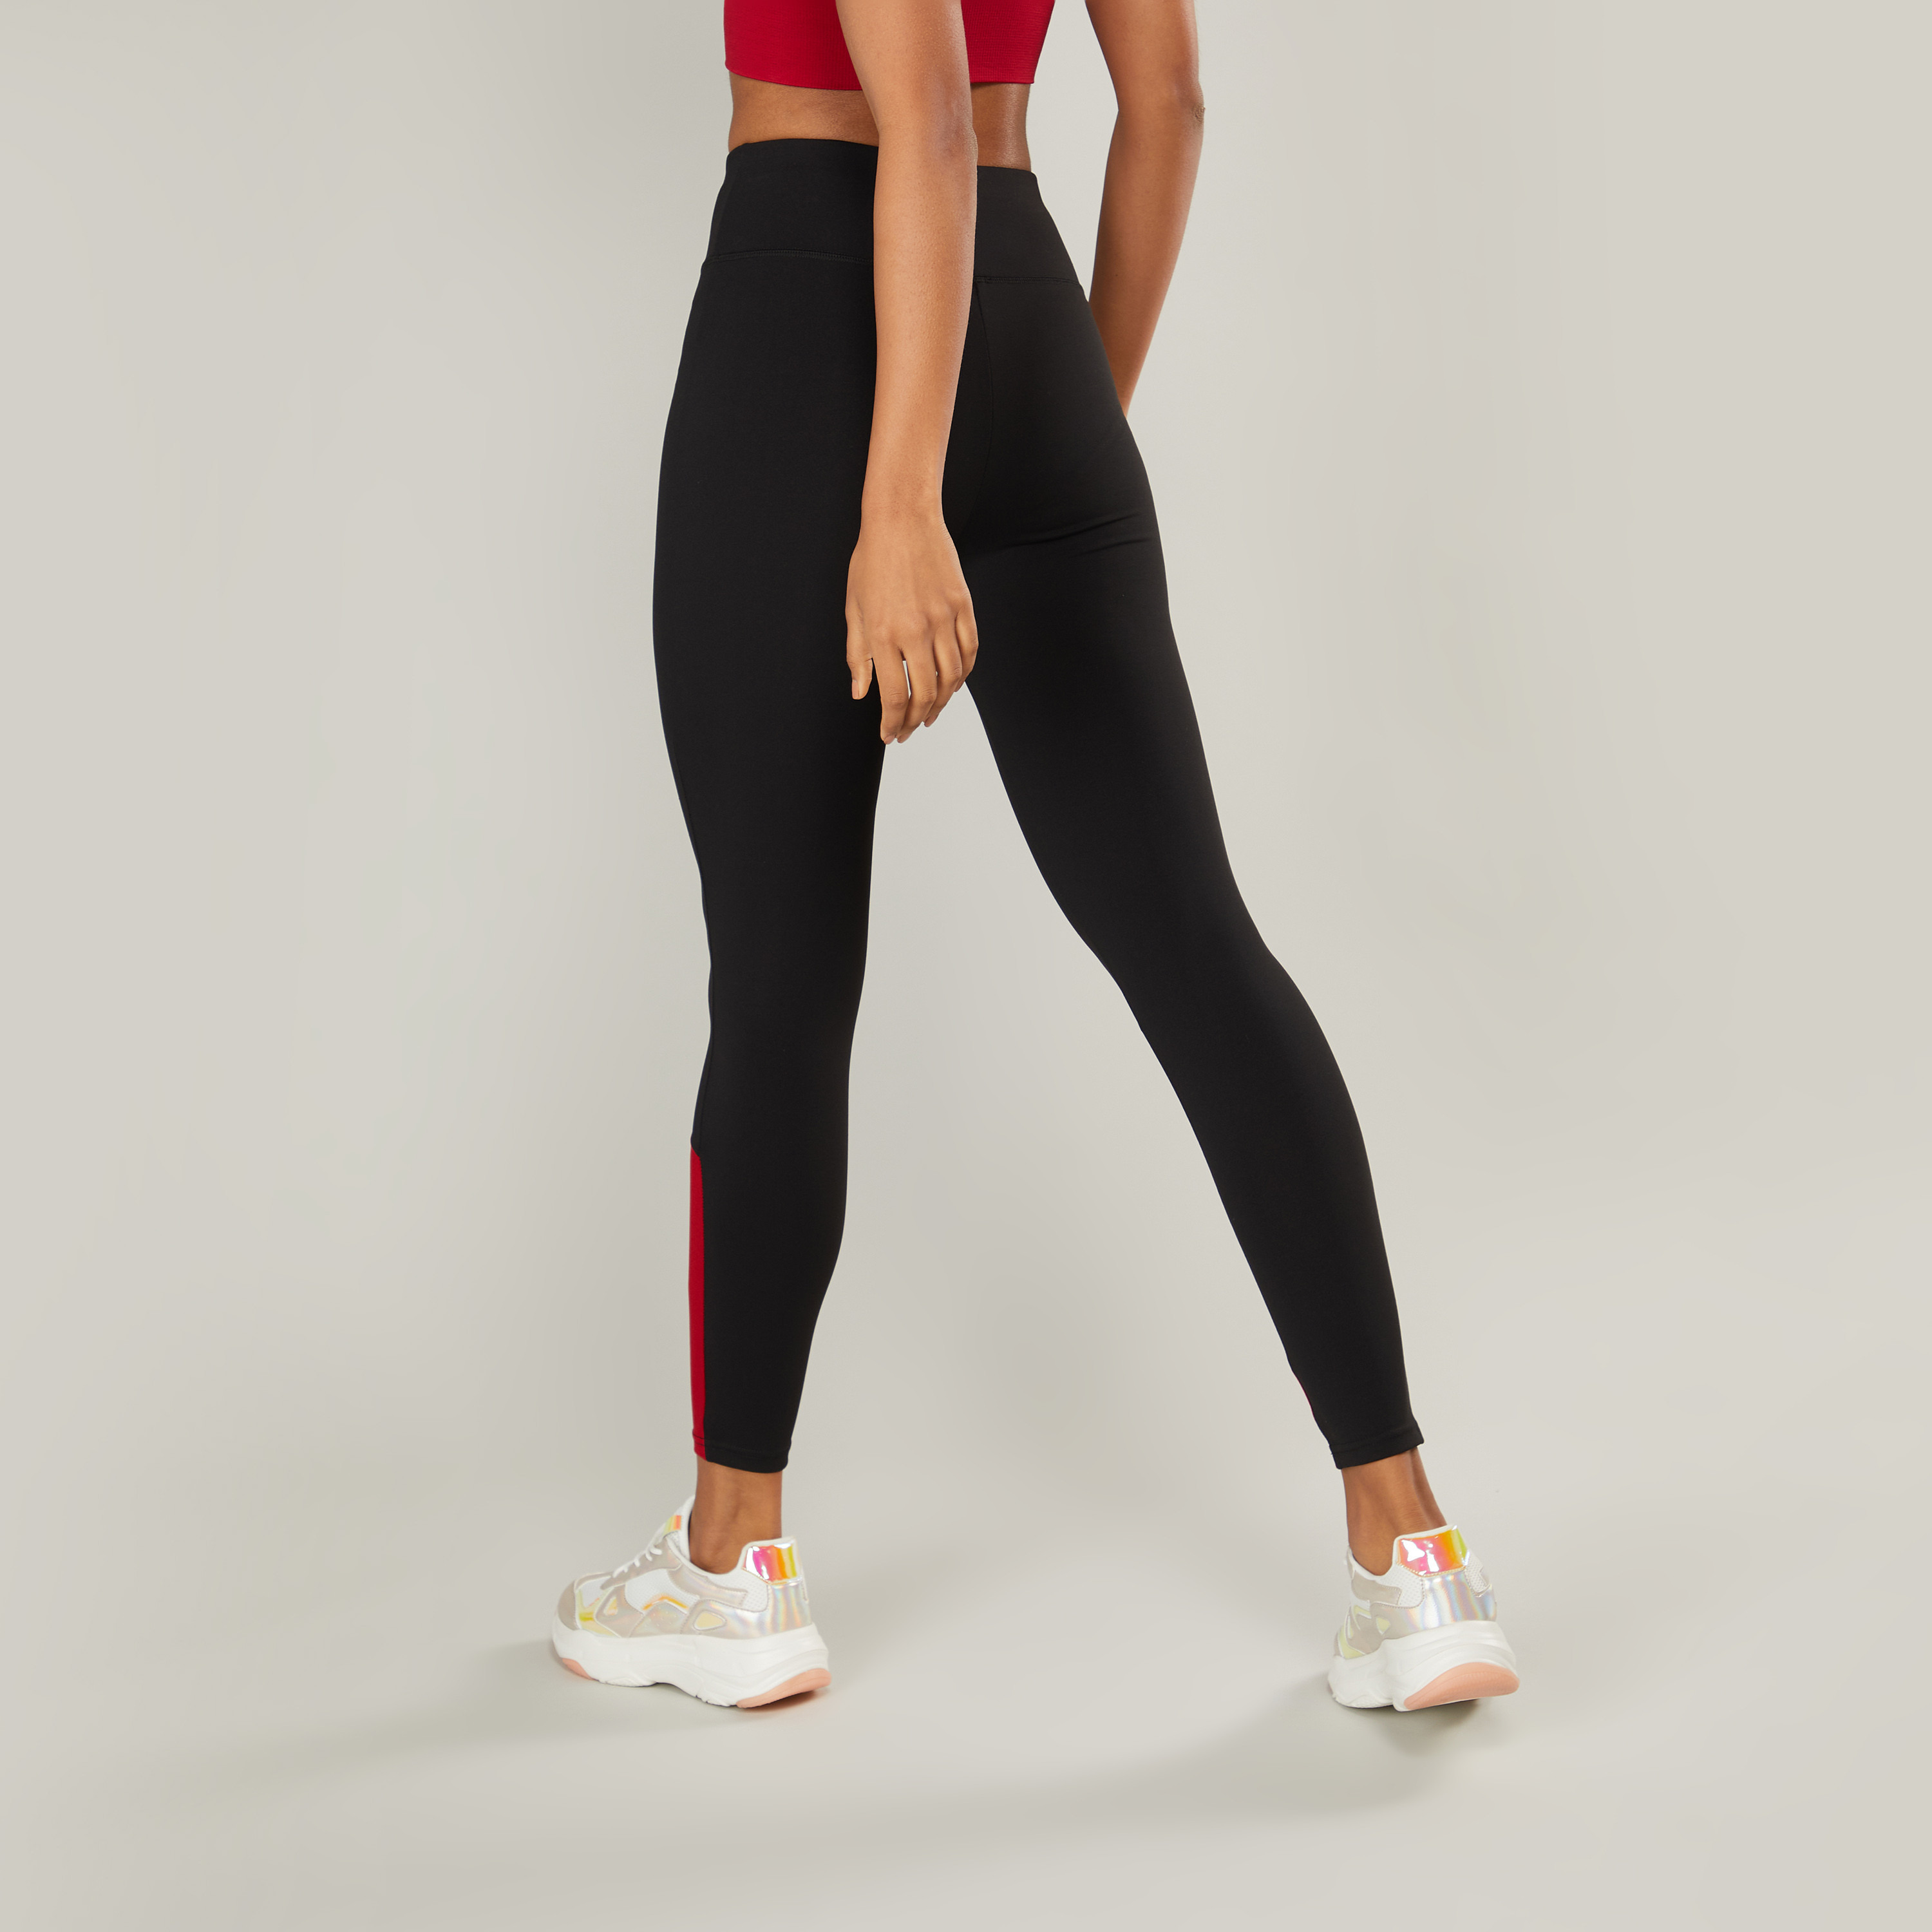 High Waist Scrunch Peach Yoga Seamless Workout Leggings For Women Back And  V Butt Fitness Workout, Gym Training, Running, And Hip Lifting Pants From  Yujia09, $16.8 | DHgate.Com